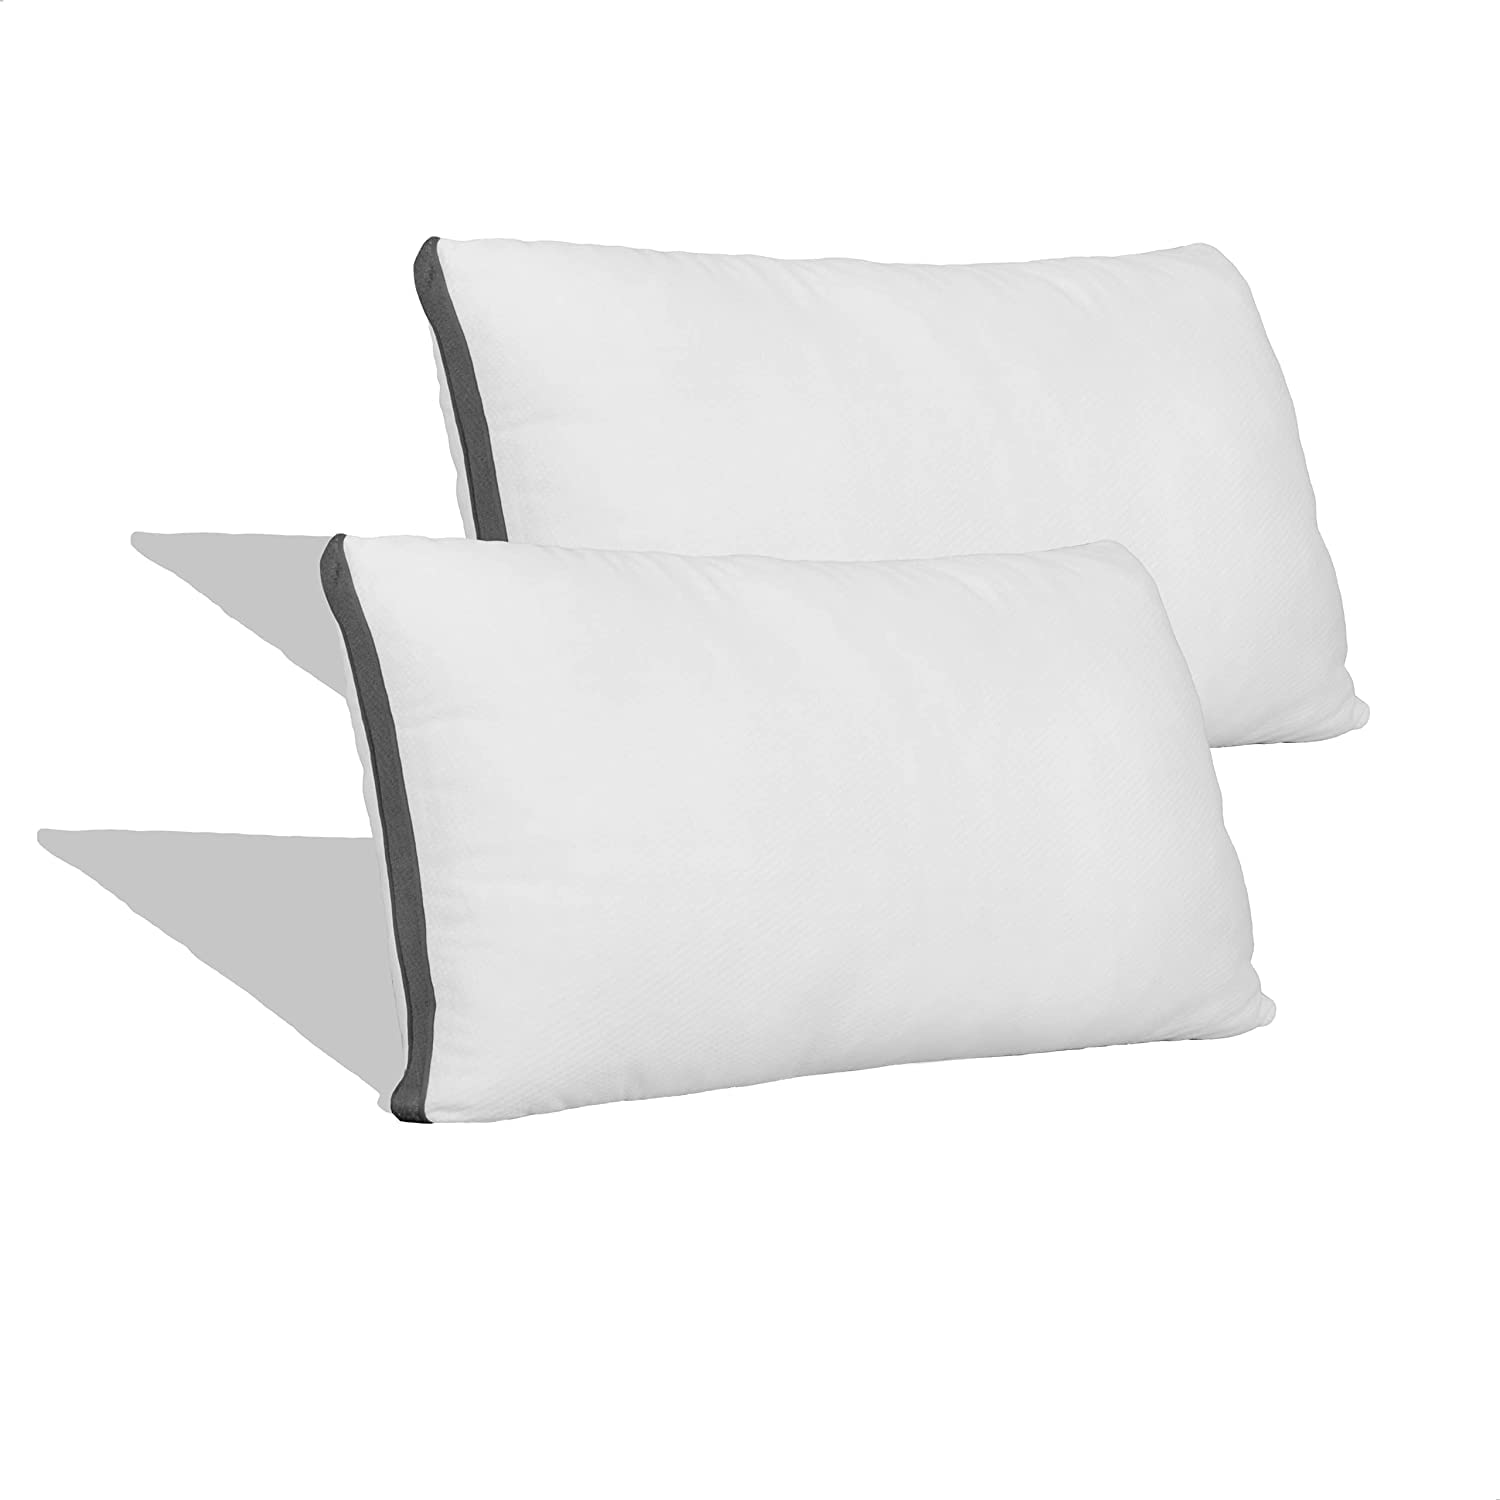 Coop Home Goods Soft Noiseless Pillow Protectors, 2-Pack